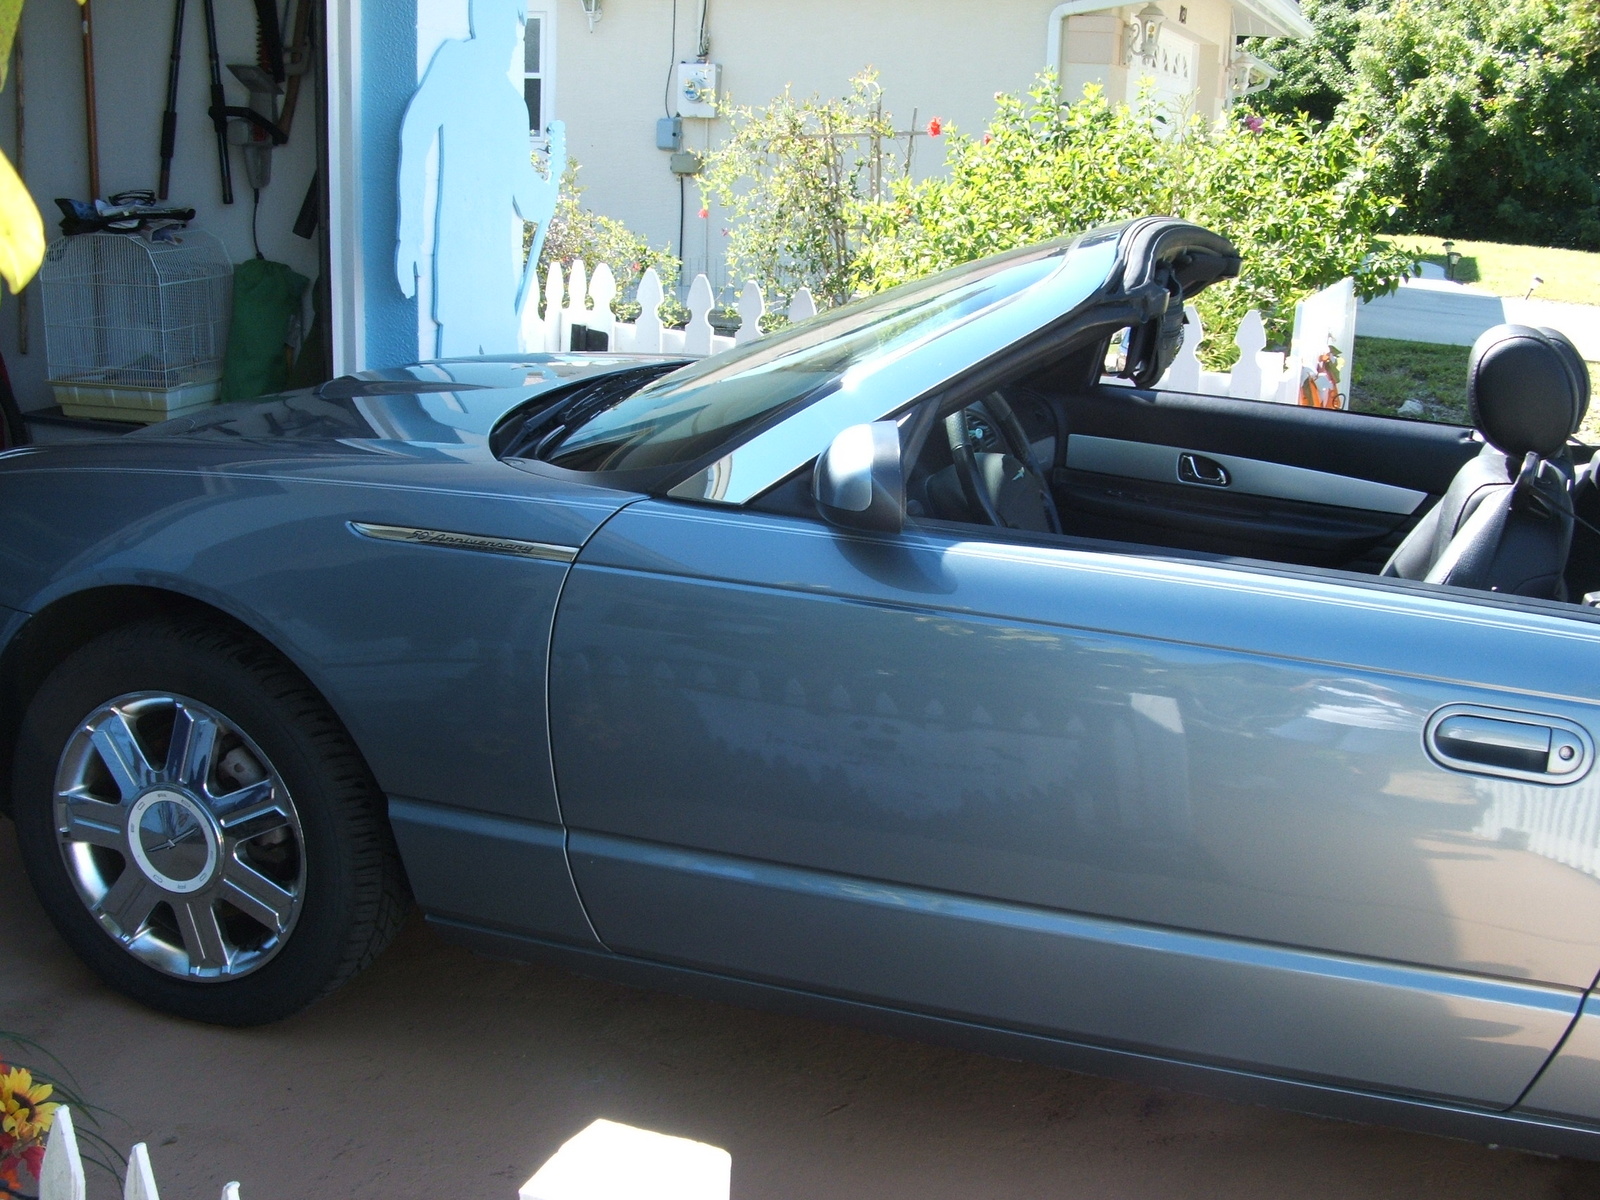 2005 Ford thunderbird convertible review #3